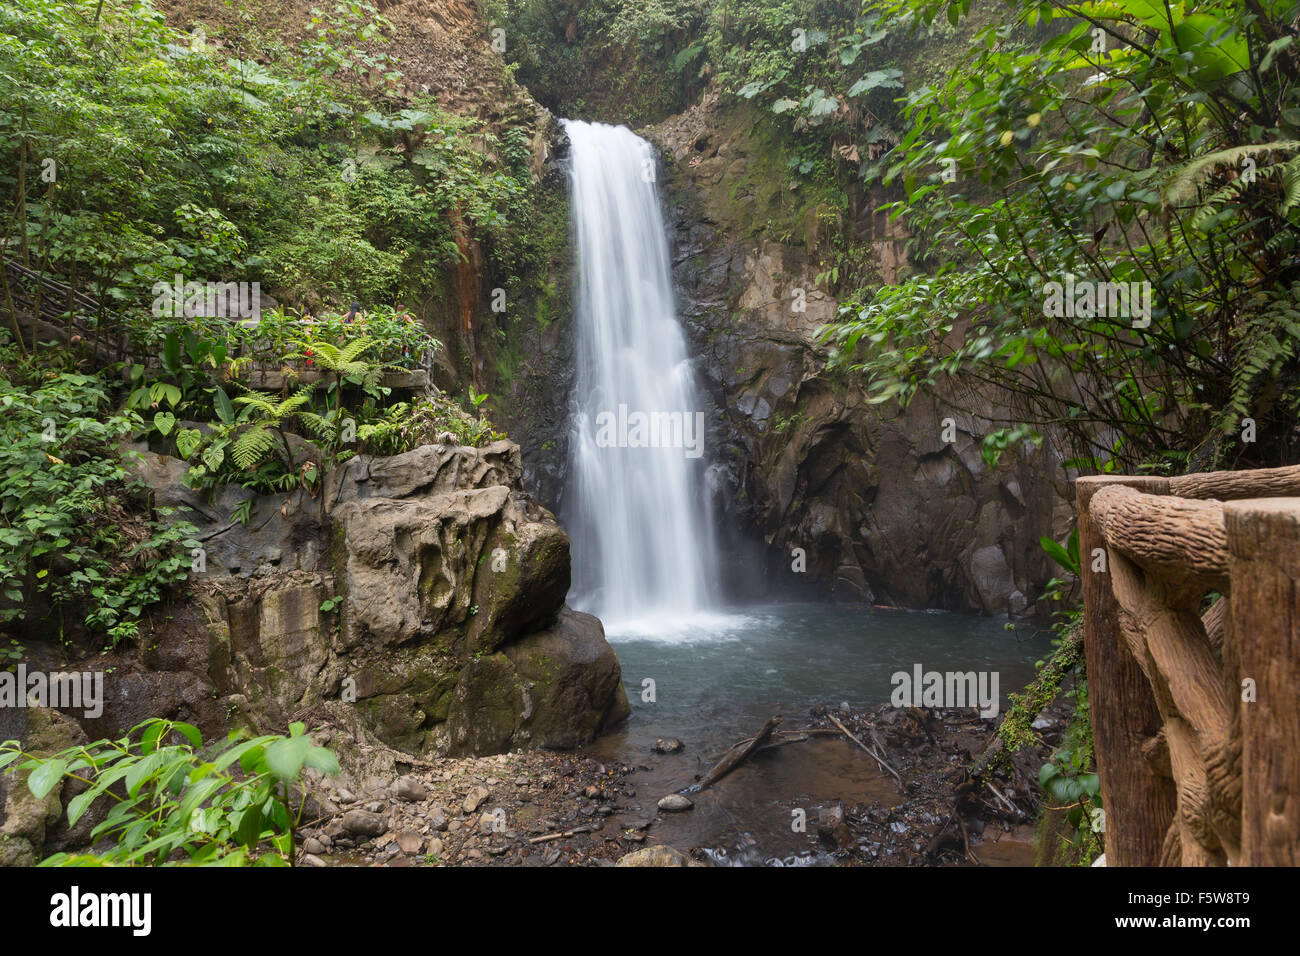 Distant view of blurred La Paz Waterfall amongst the rainforest, Costa Rica Stock Photo